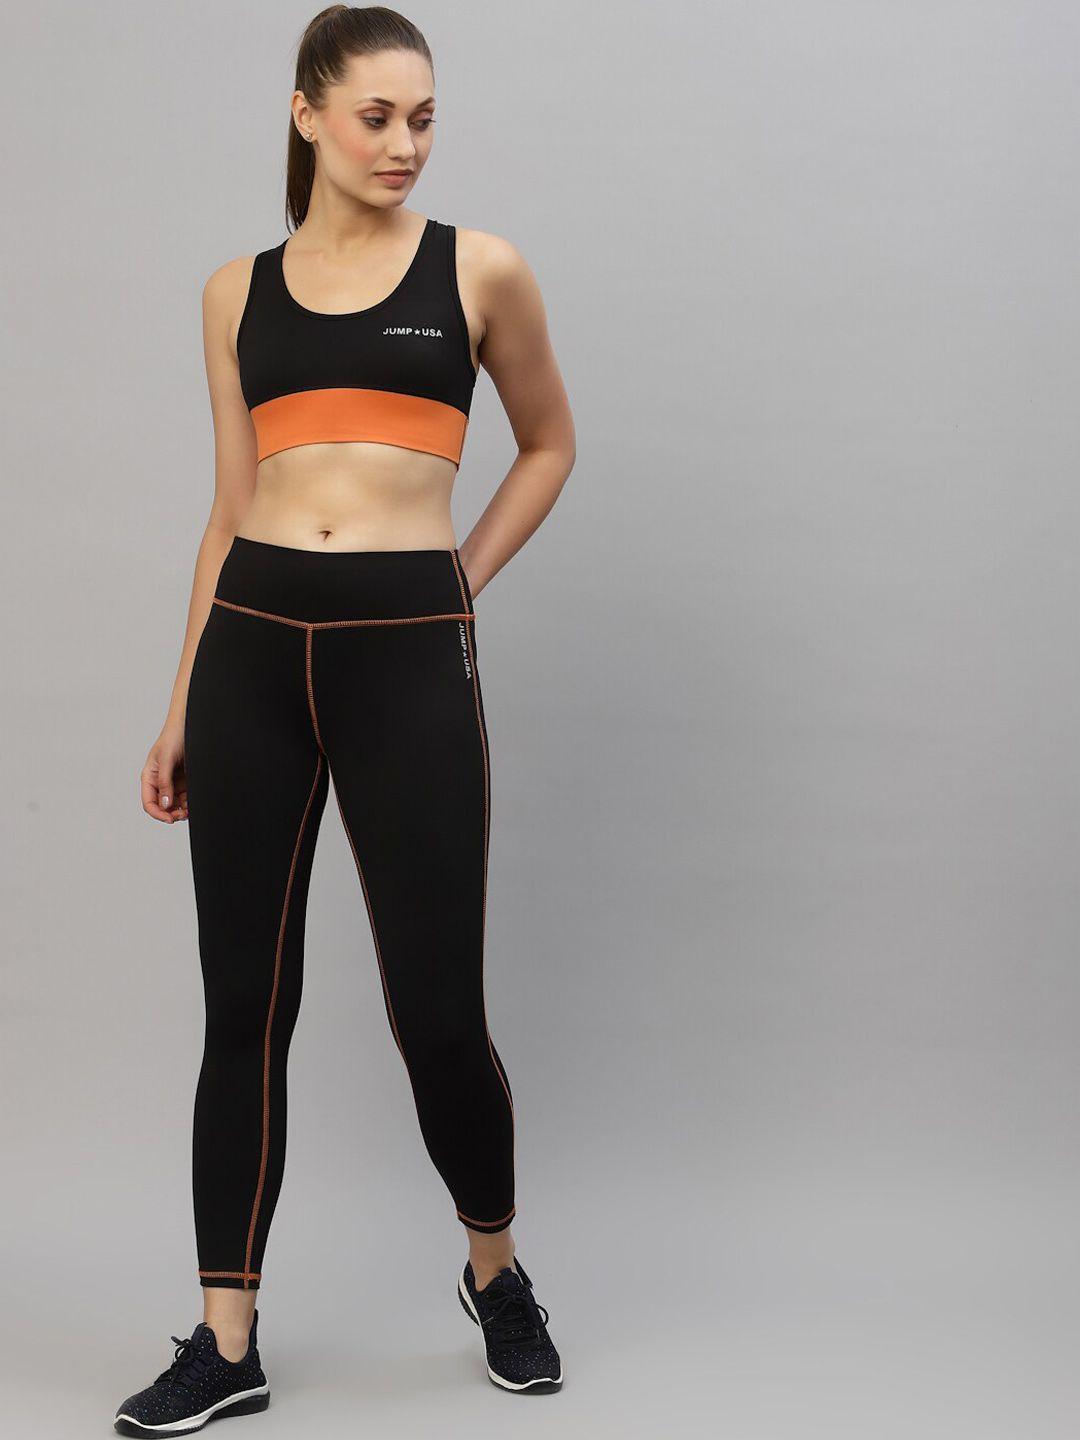 jump usa black & orange crop top & tights co-ords set with rapid dry technology